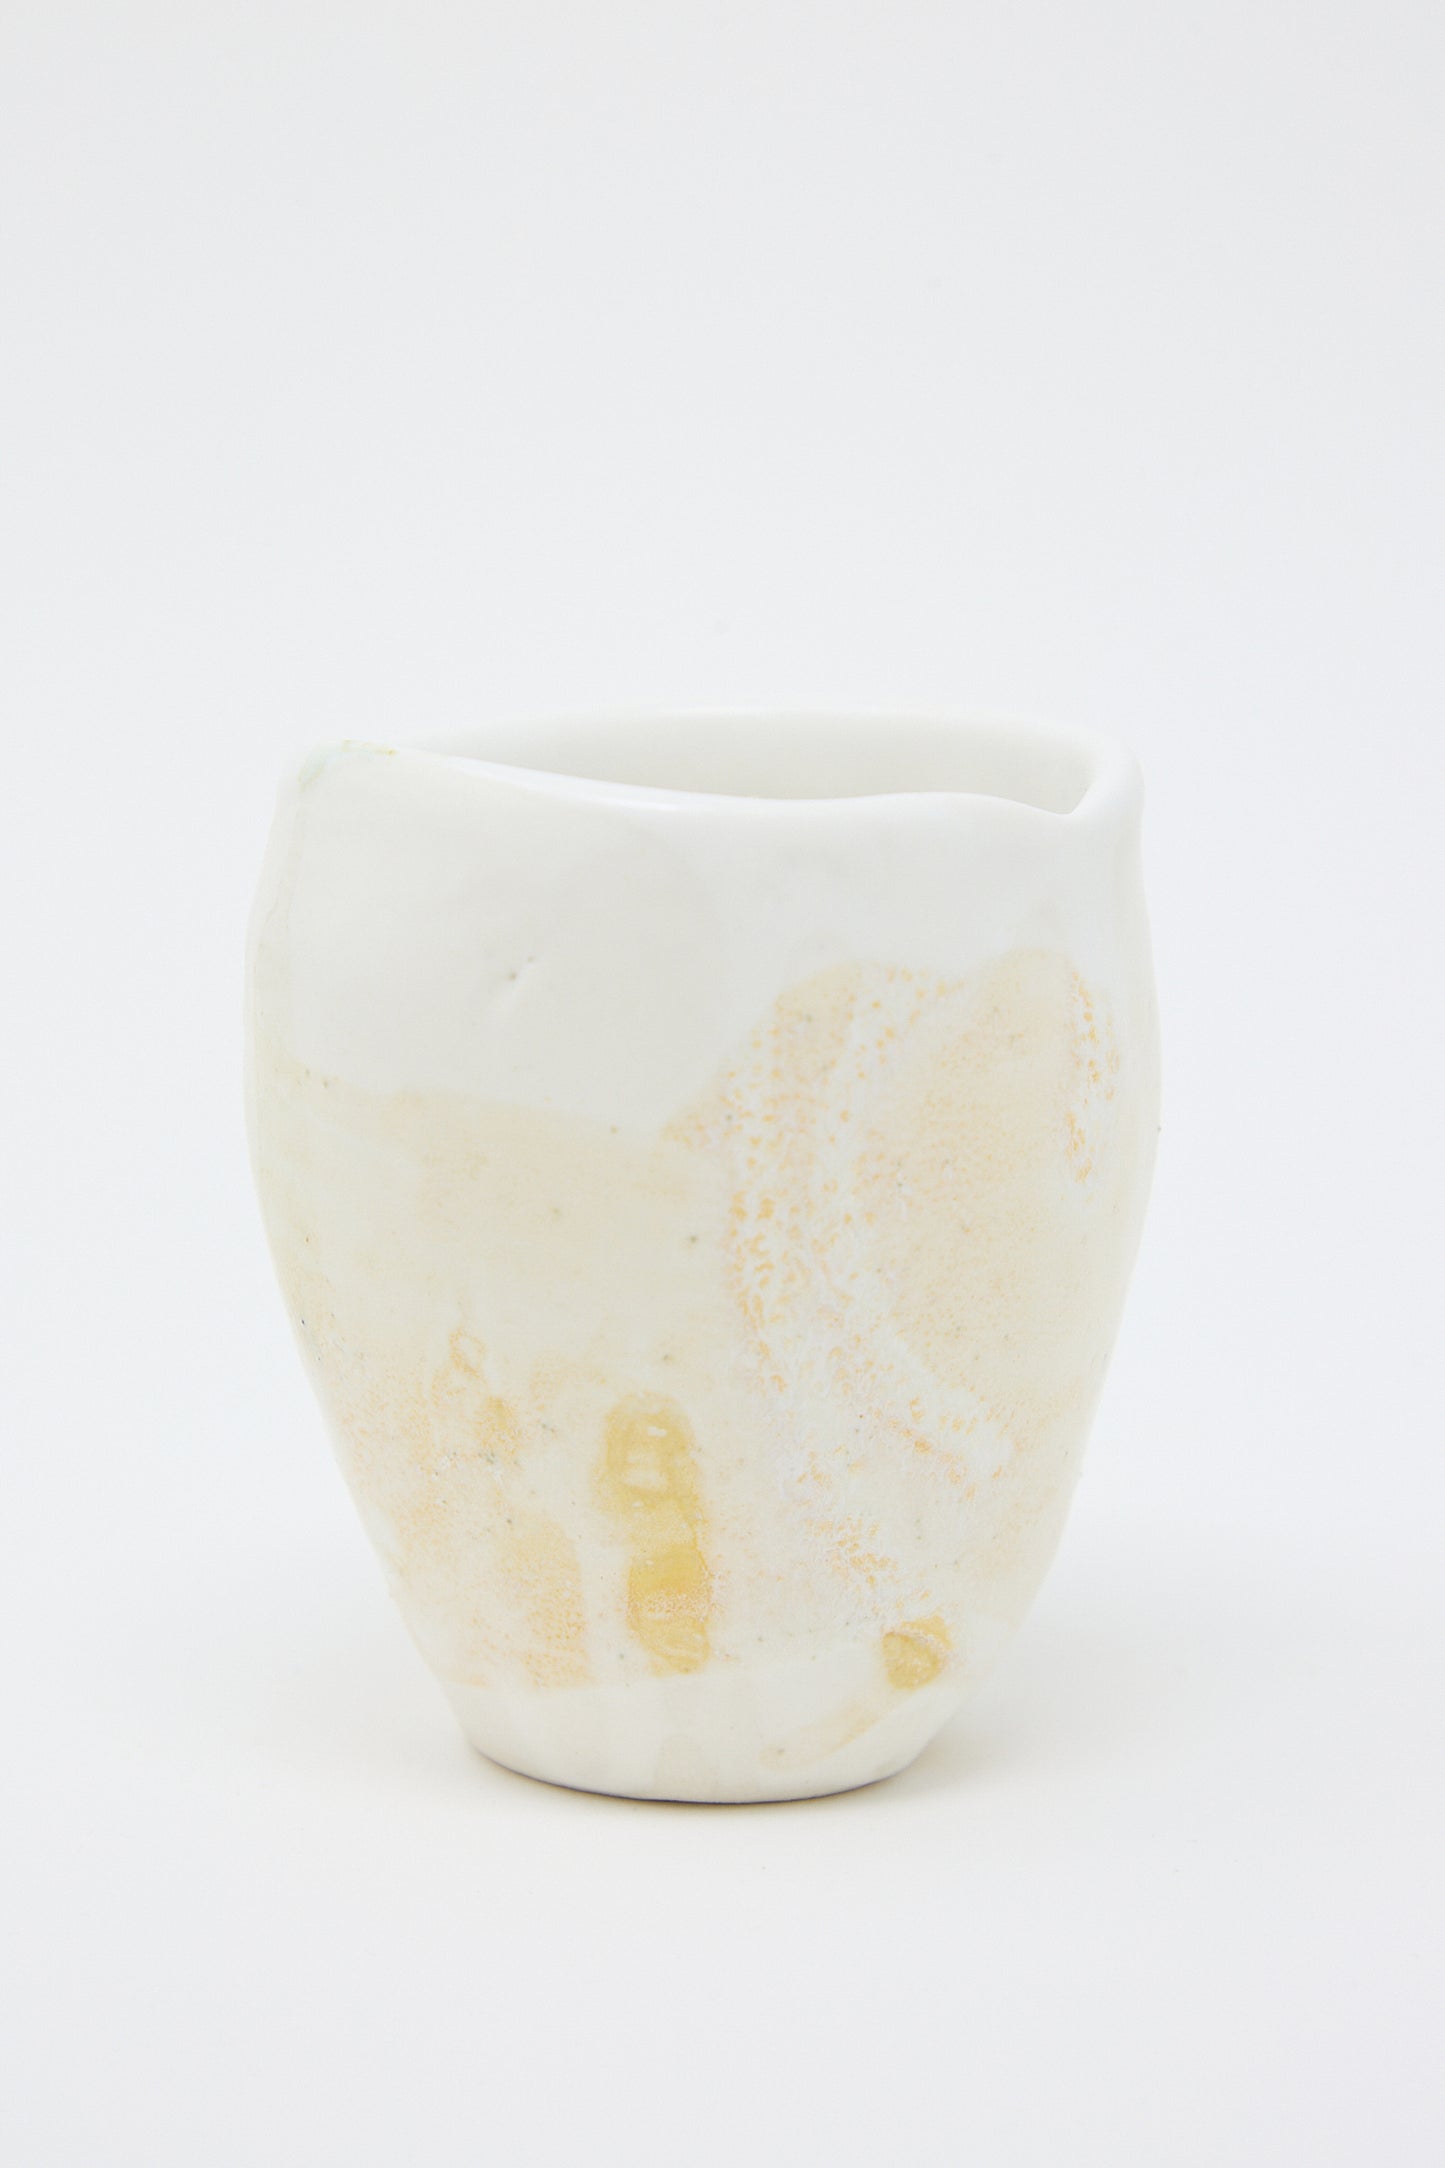 A beige and white porcelain tumbler from MONDAYS with a textured yellow glaze. Up close view.